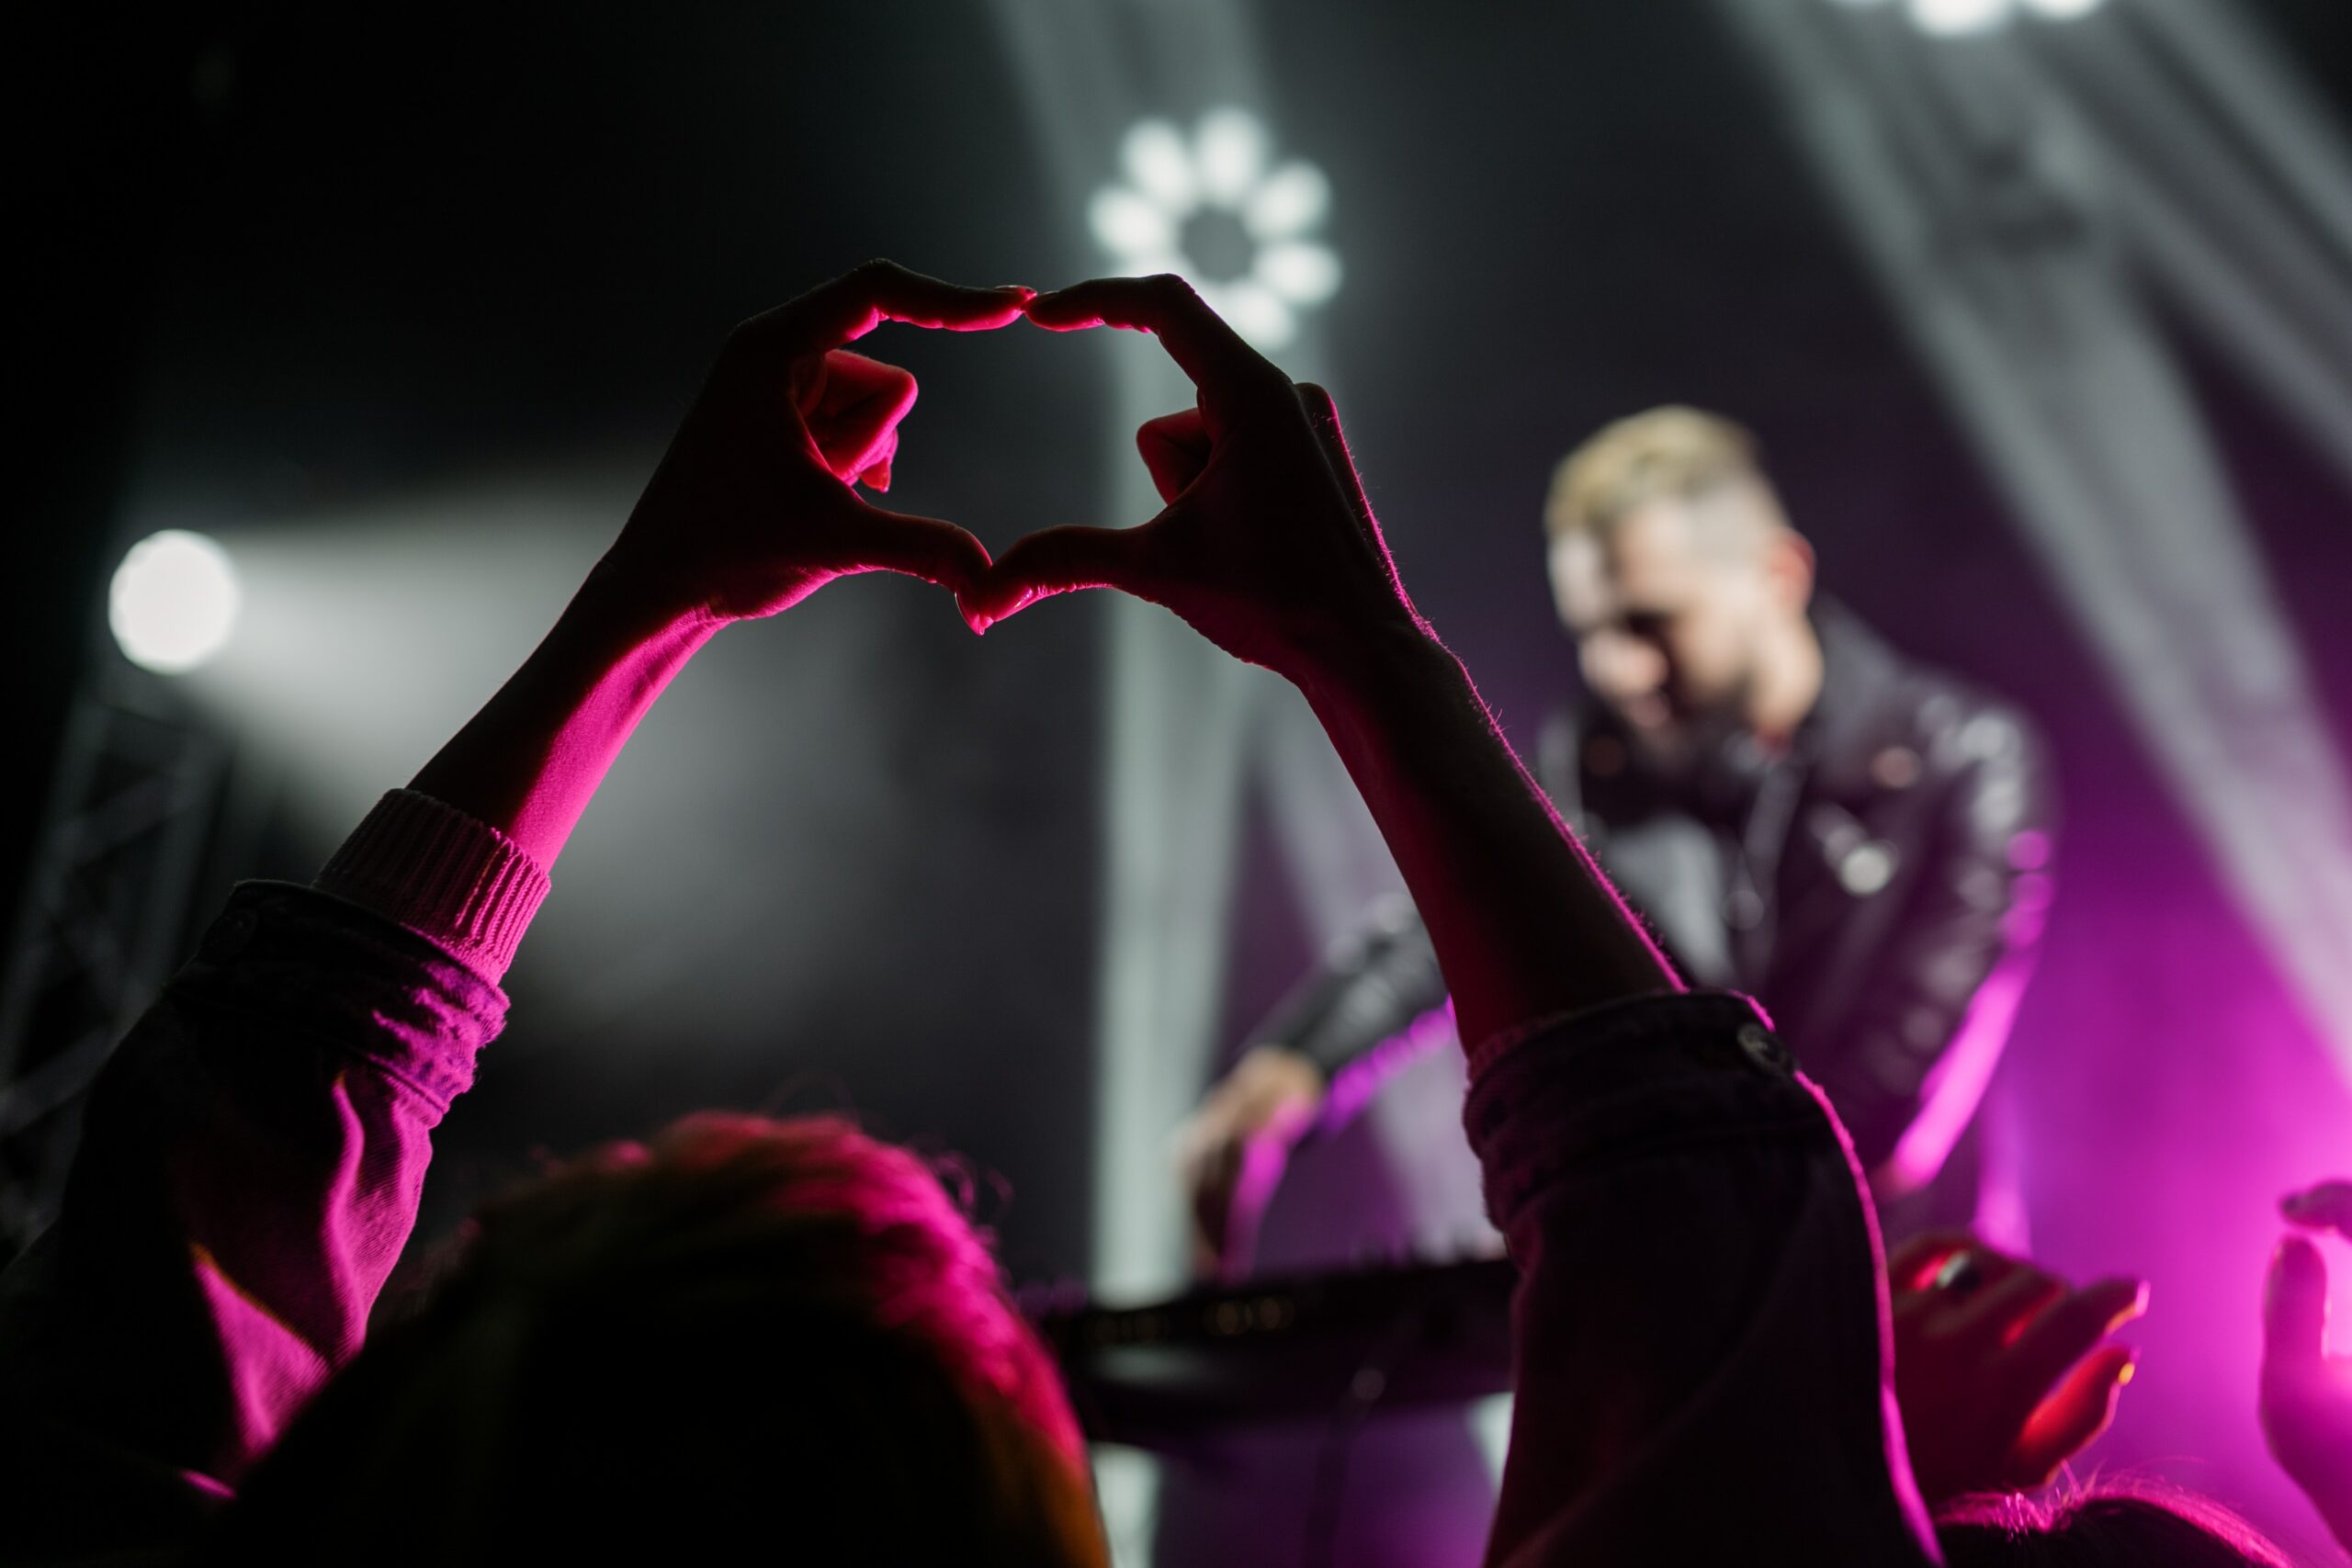 A person making a heart with their hands at a concert